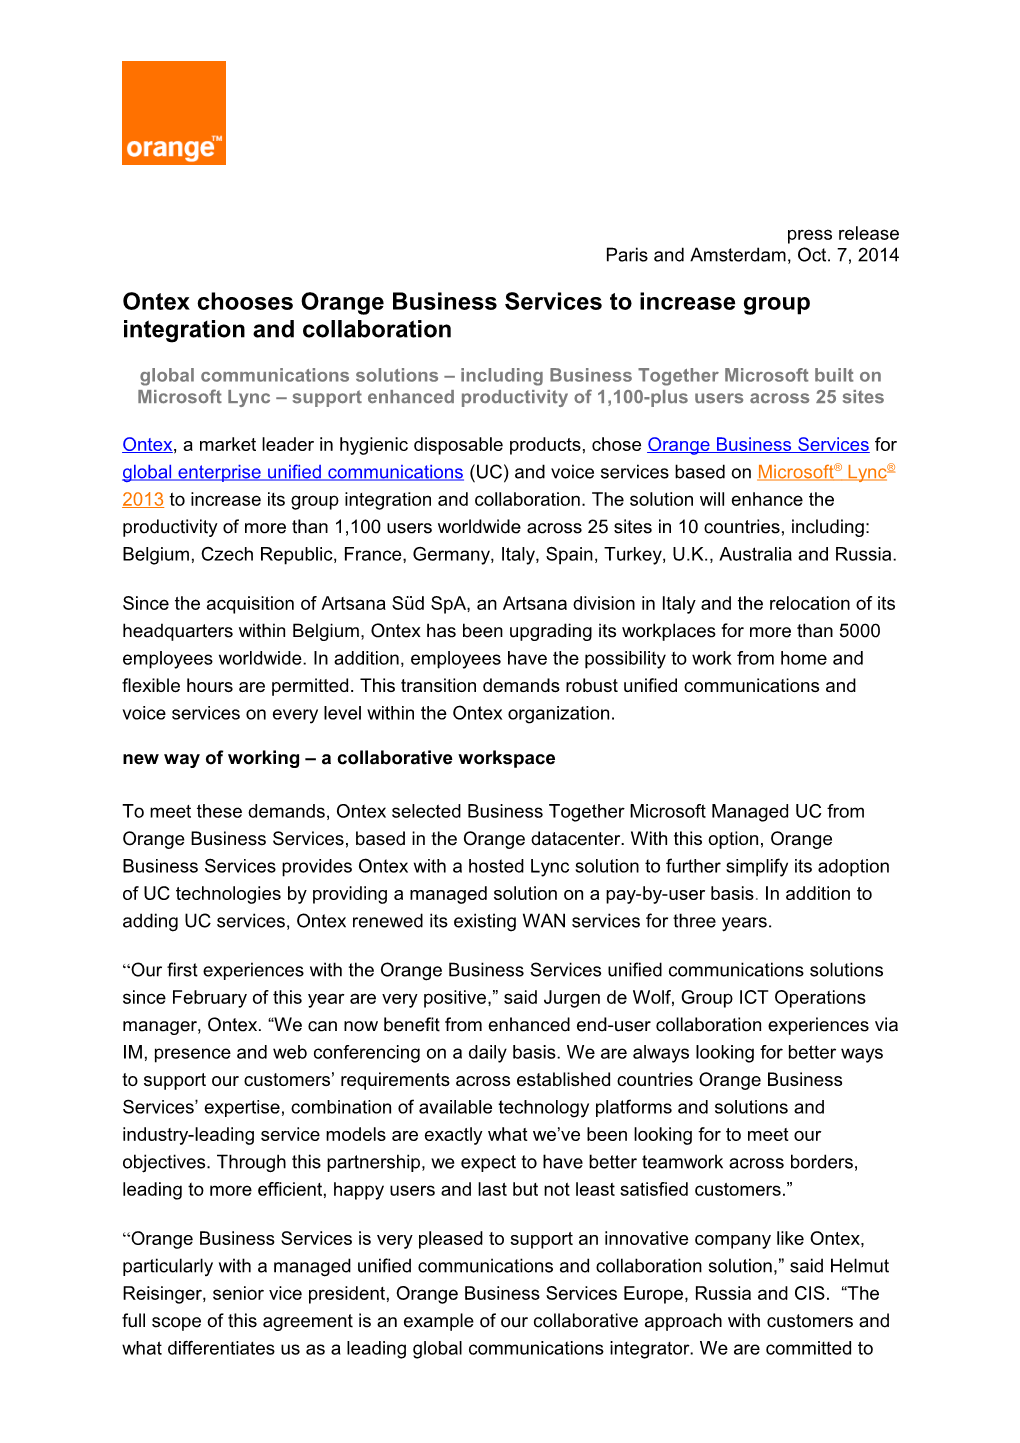 Ontex Chooses Orange Business Services to Increase Group Integration and Collaboration